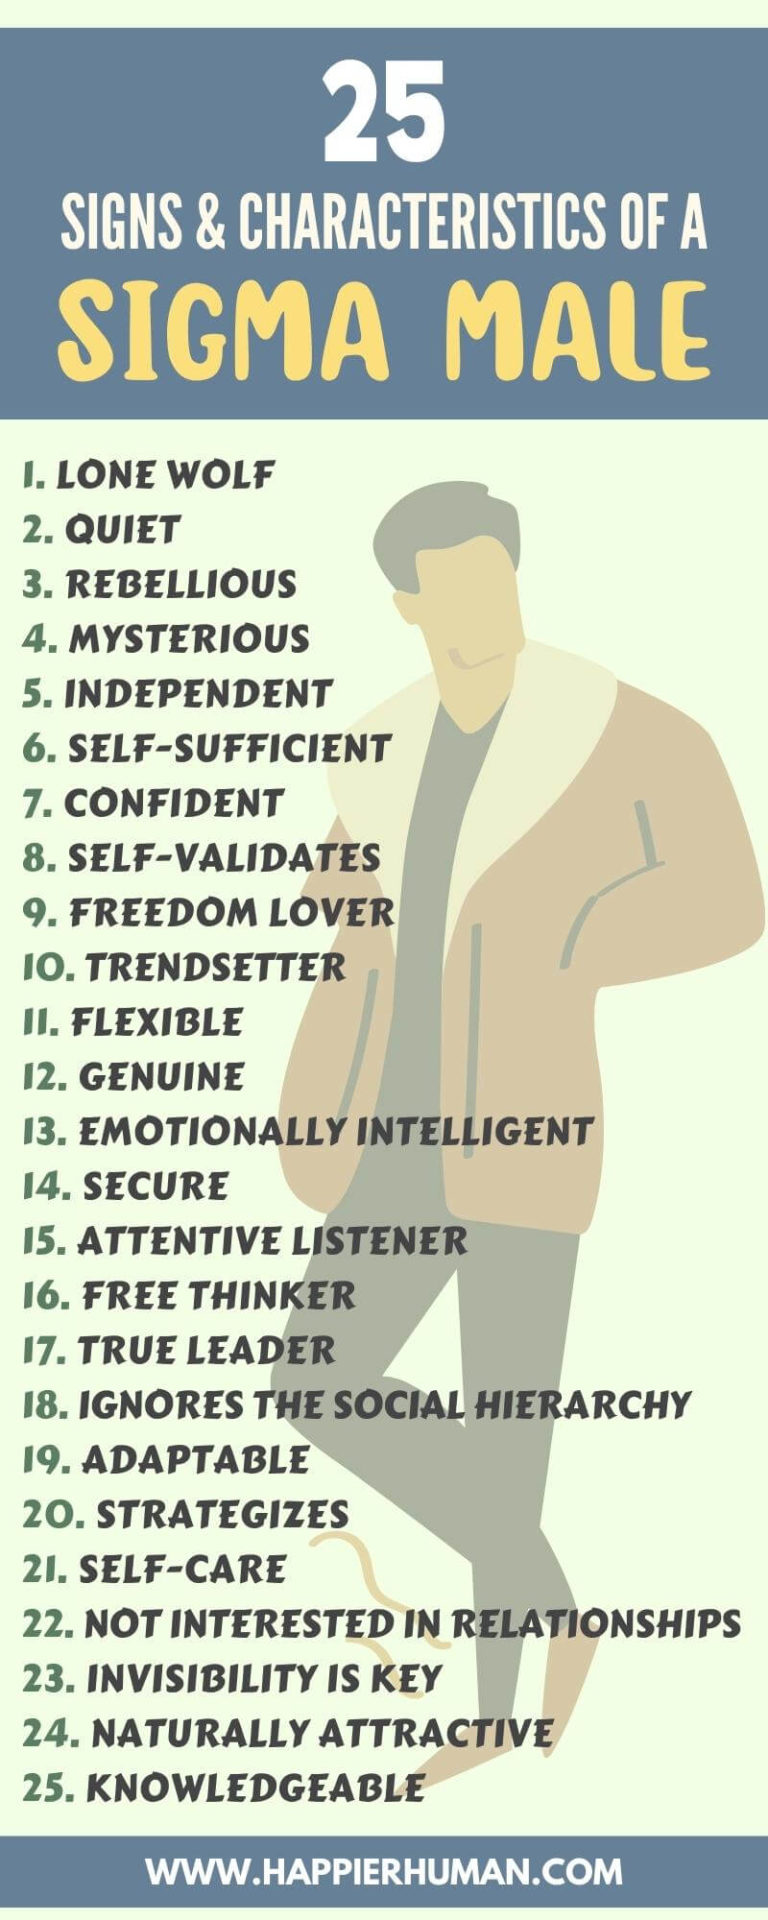 25 Signs & Characteristics of a Sigma Male Happier Human